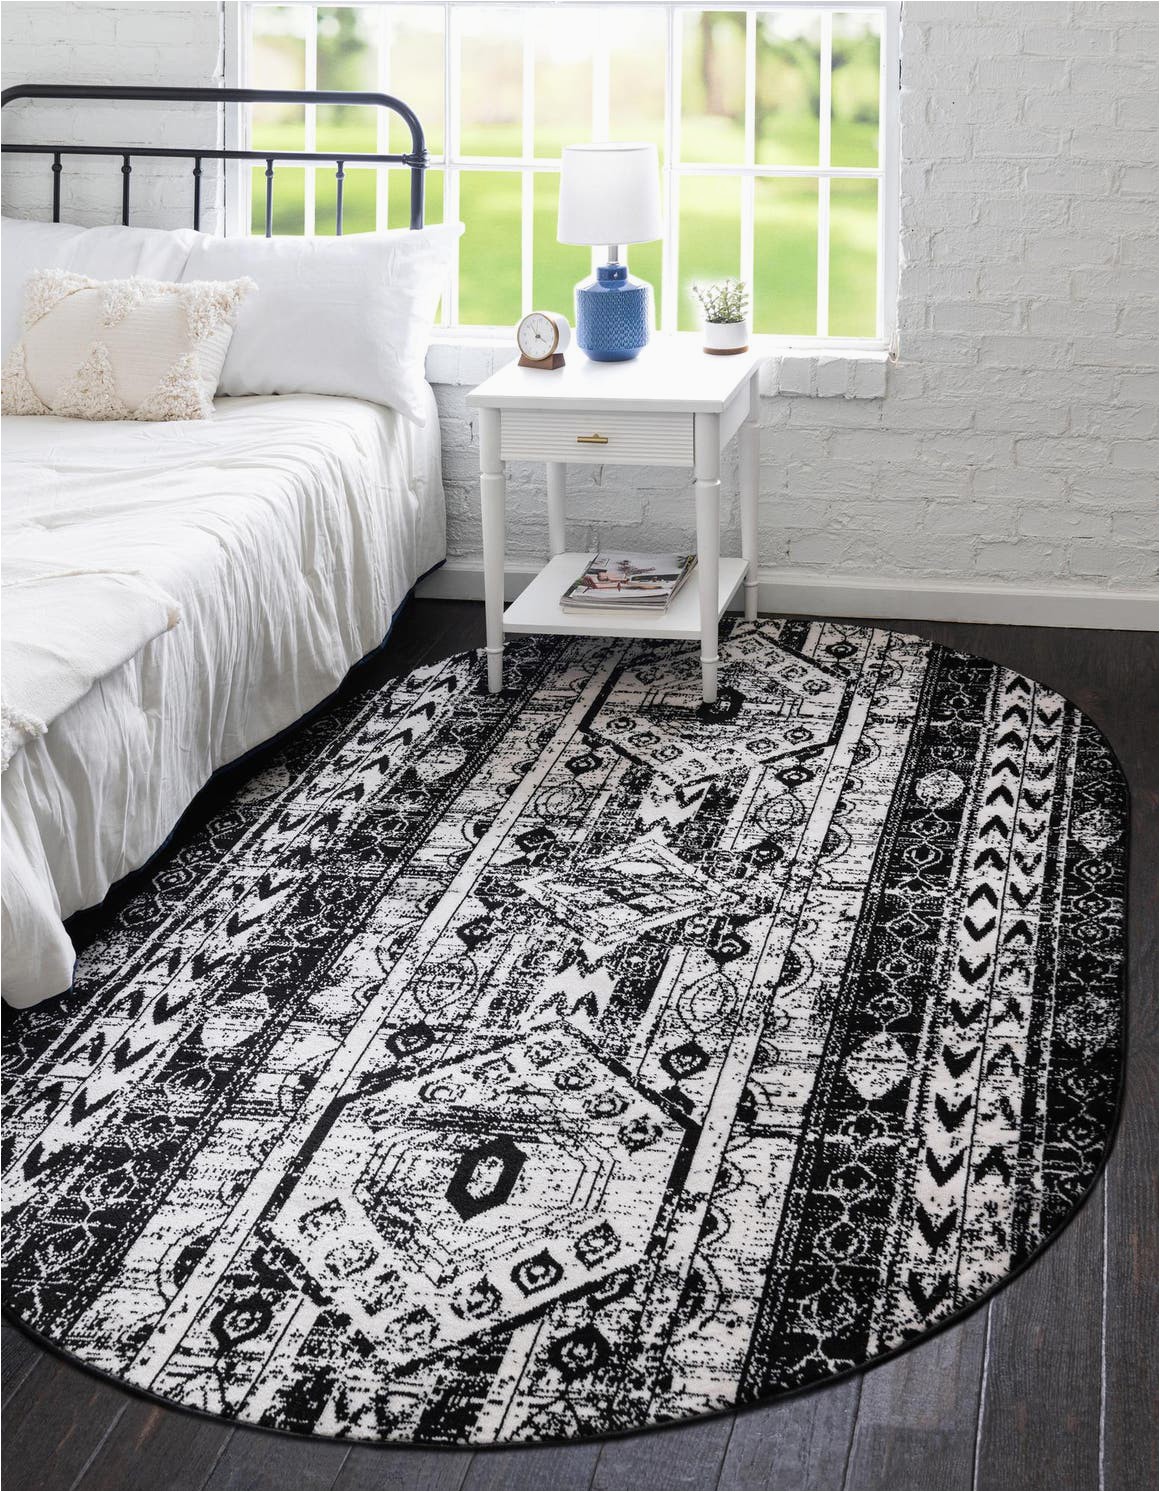 Black and White area Rugs 3×5 Black and White 3 X 5 oregon Oval Rug